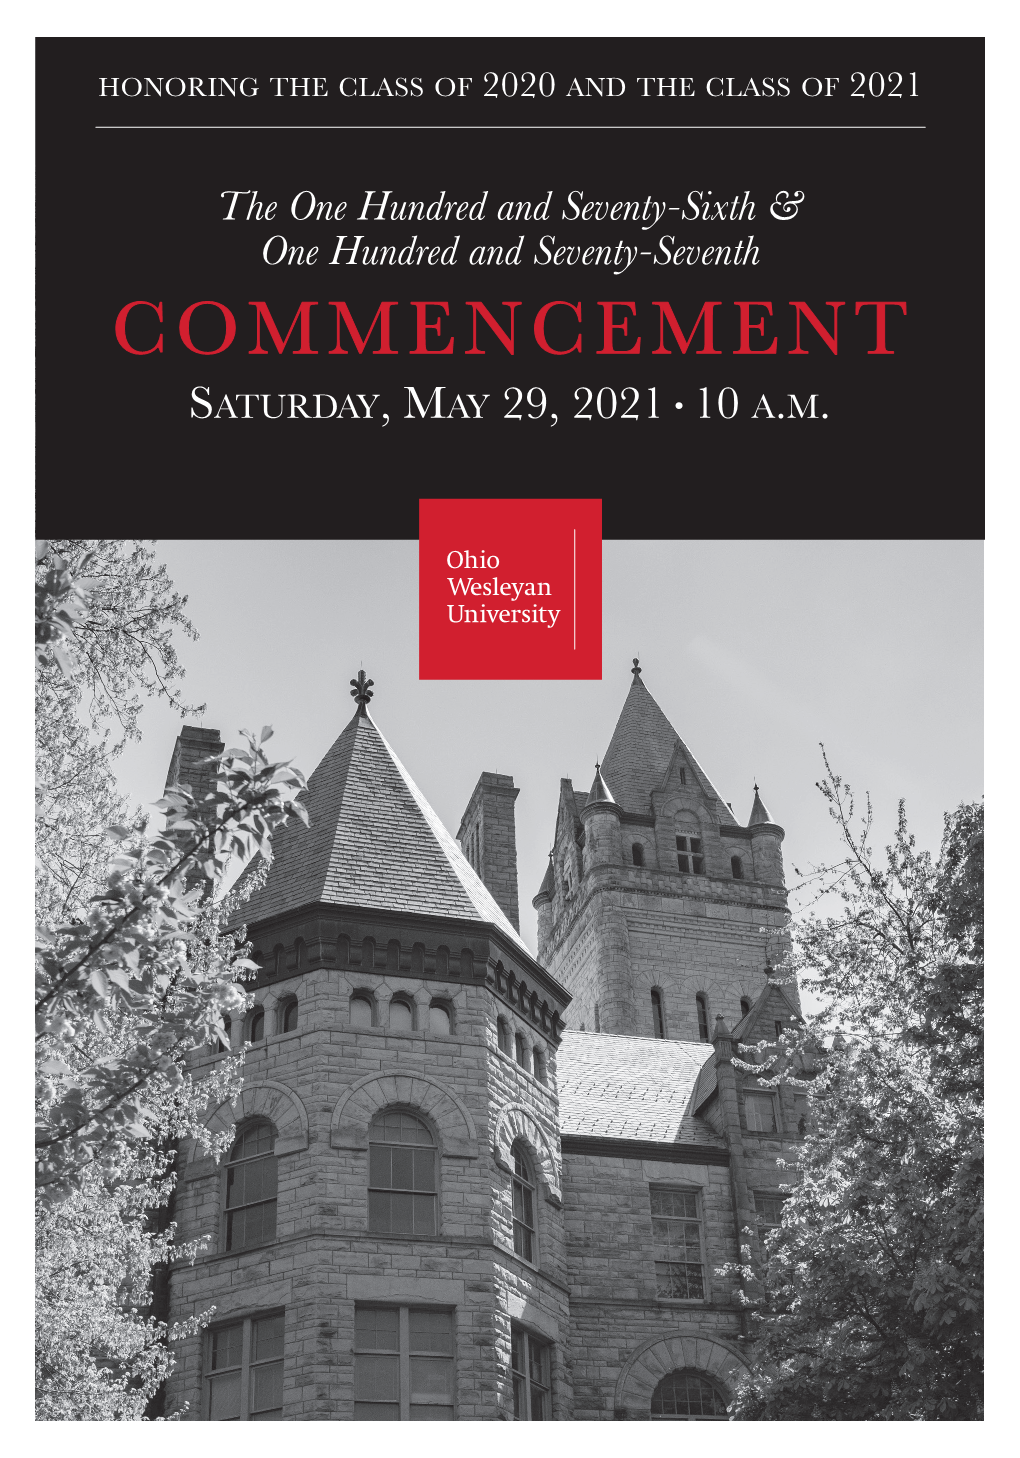 COMMENCEMENT Saturday, May 29, 2021 • 10 A.M